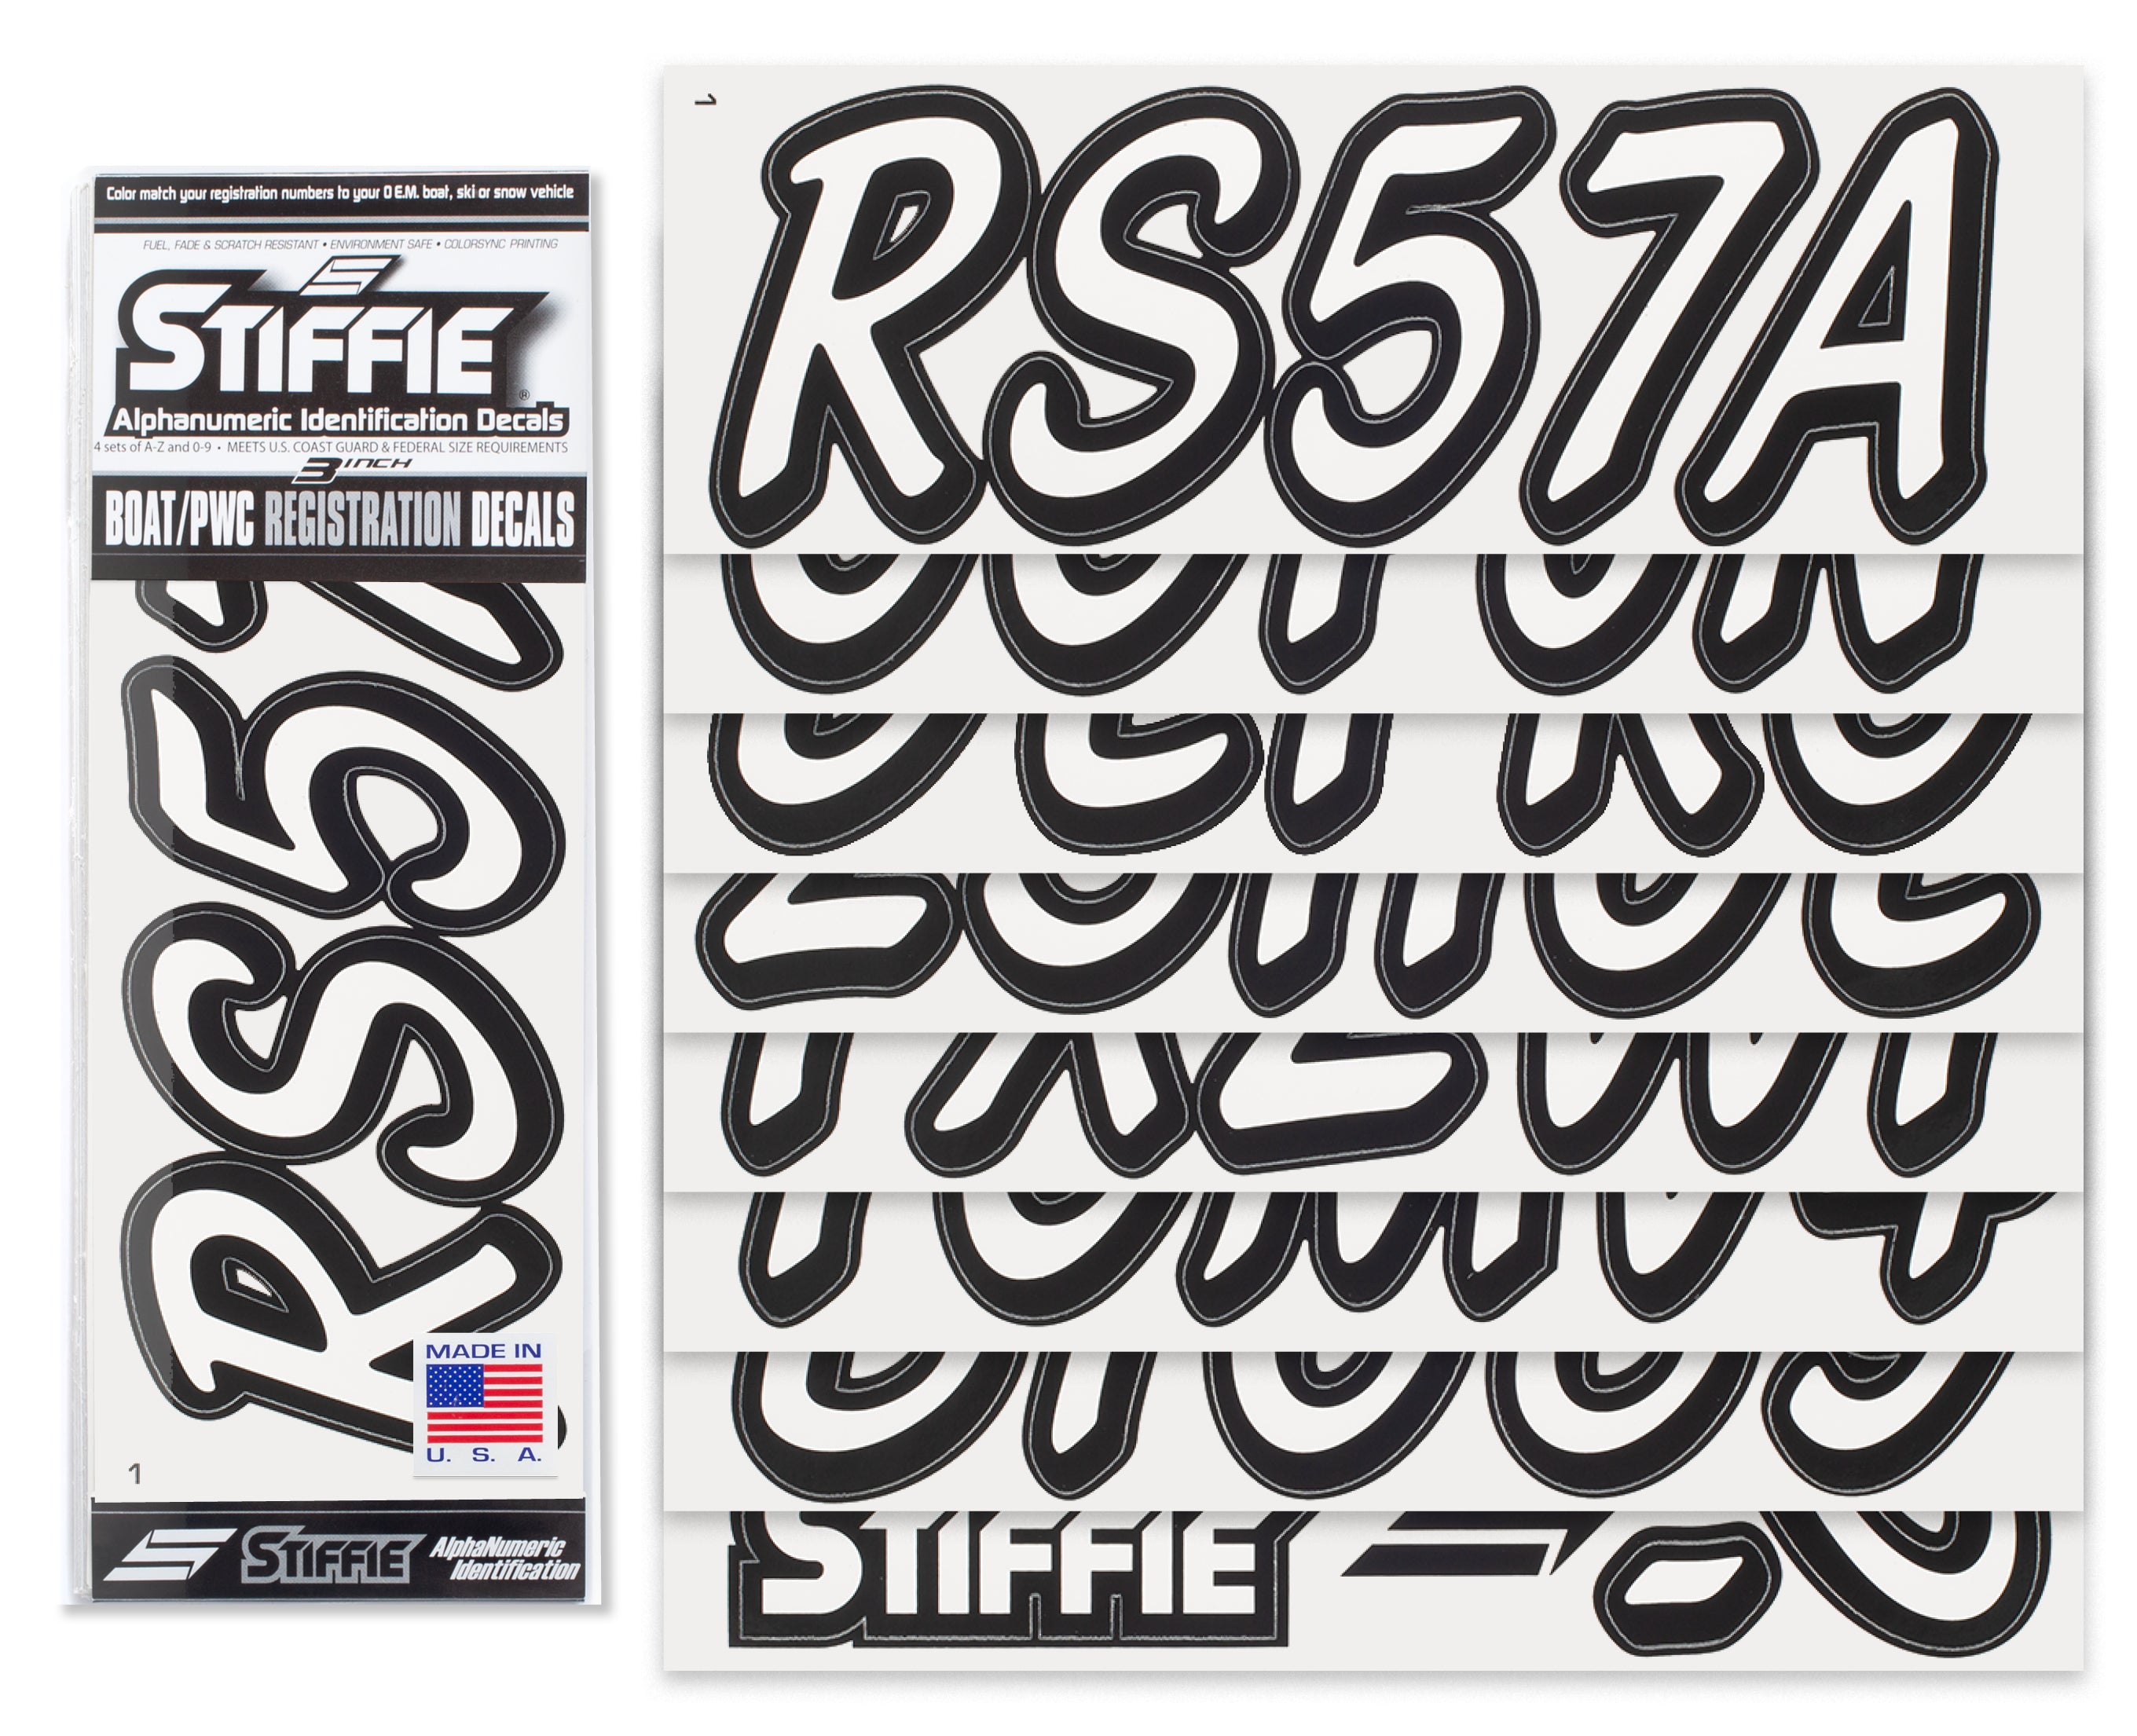 STIFFIE Whipline Solid White/Black 3" Alpha-Numeric Registration Identification Numbers Stickers Decals for Boats & Personal Watercraft